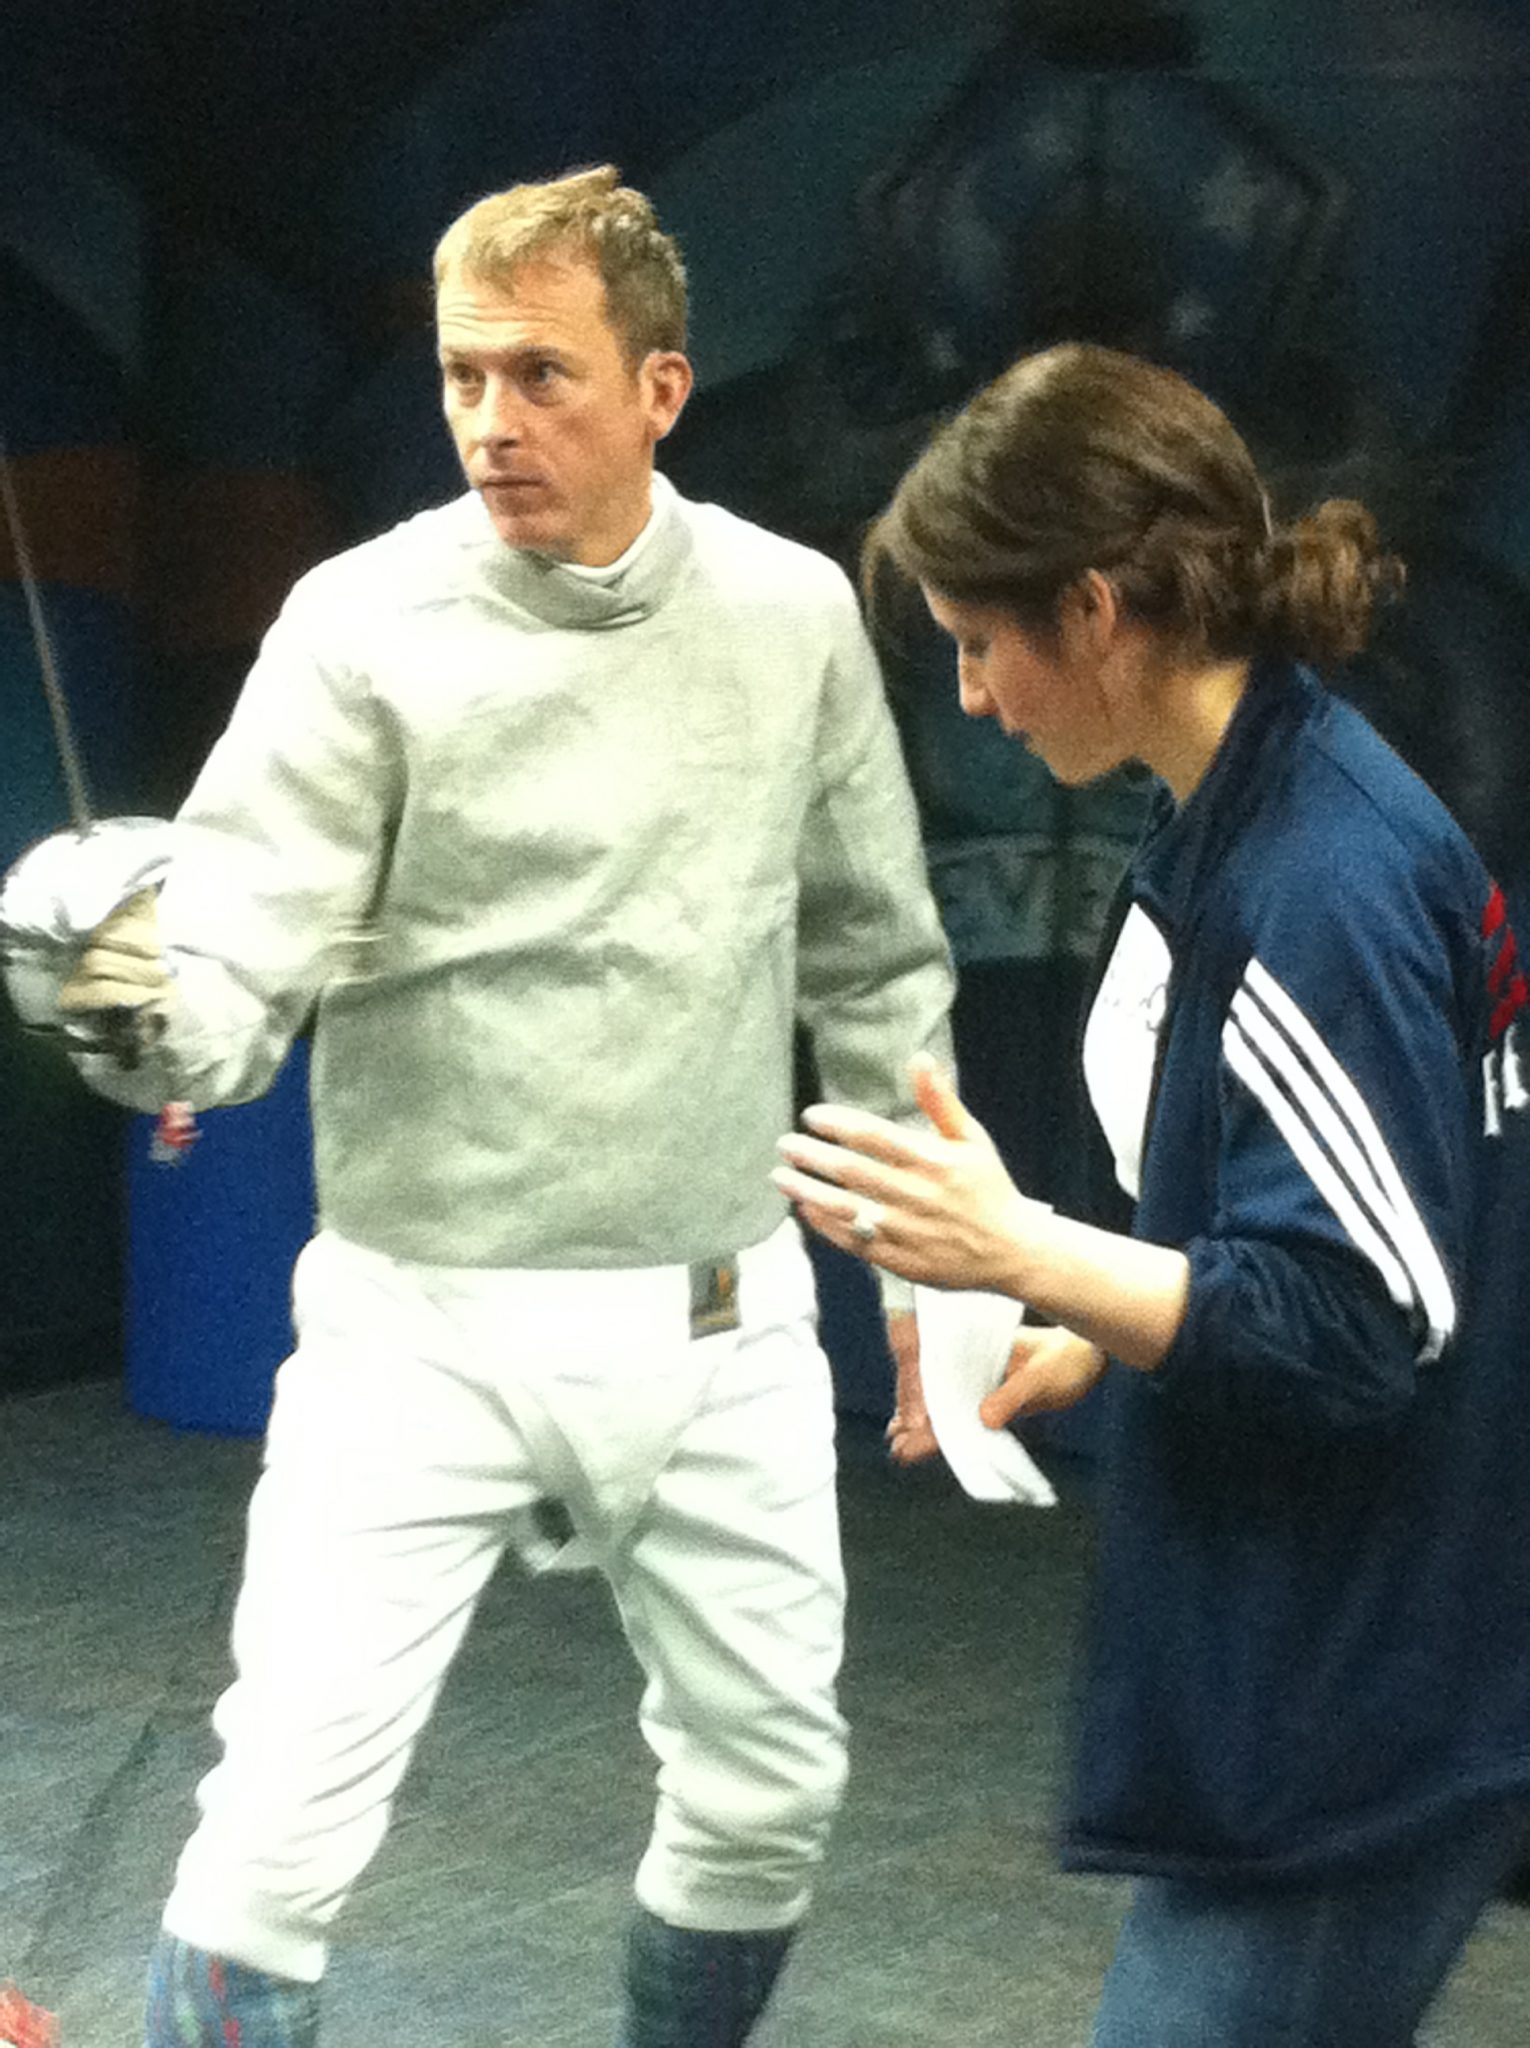 Ron Clark Academy Fencing Demonstration